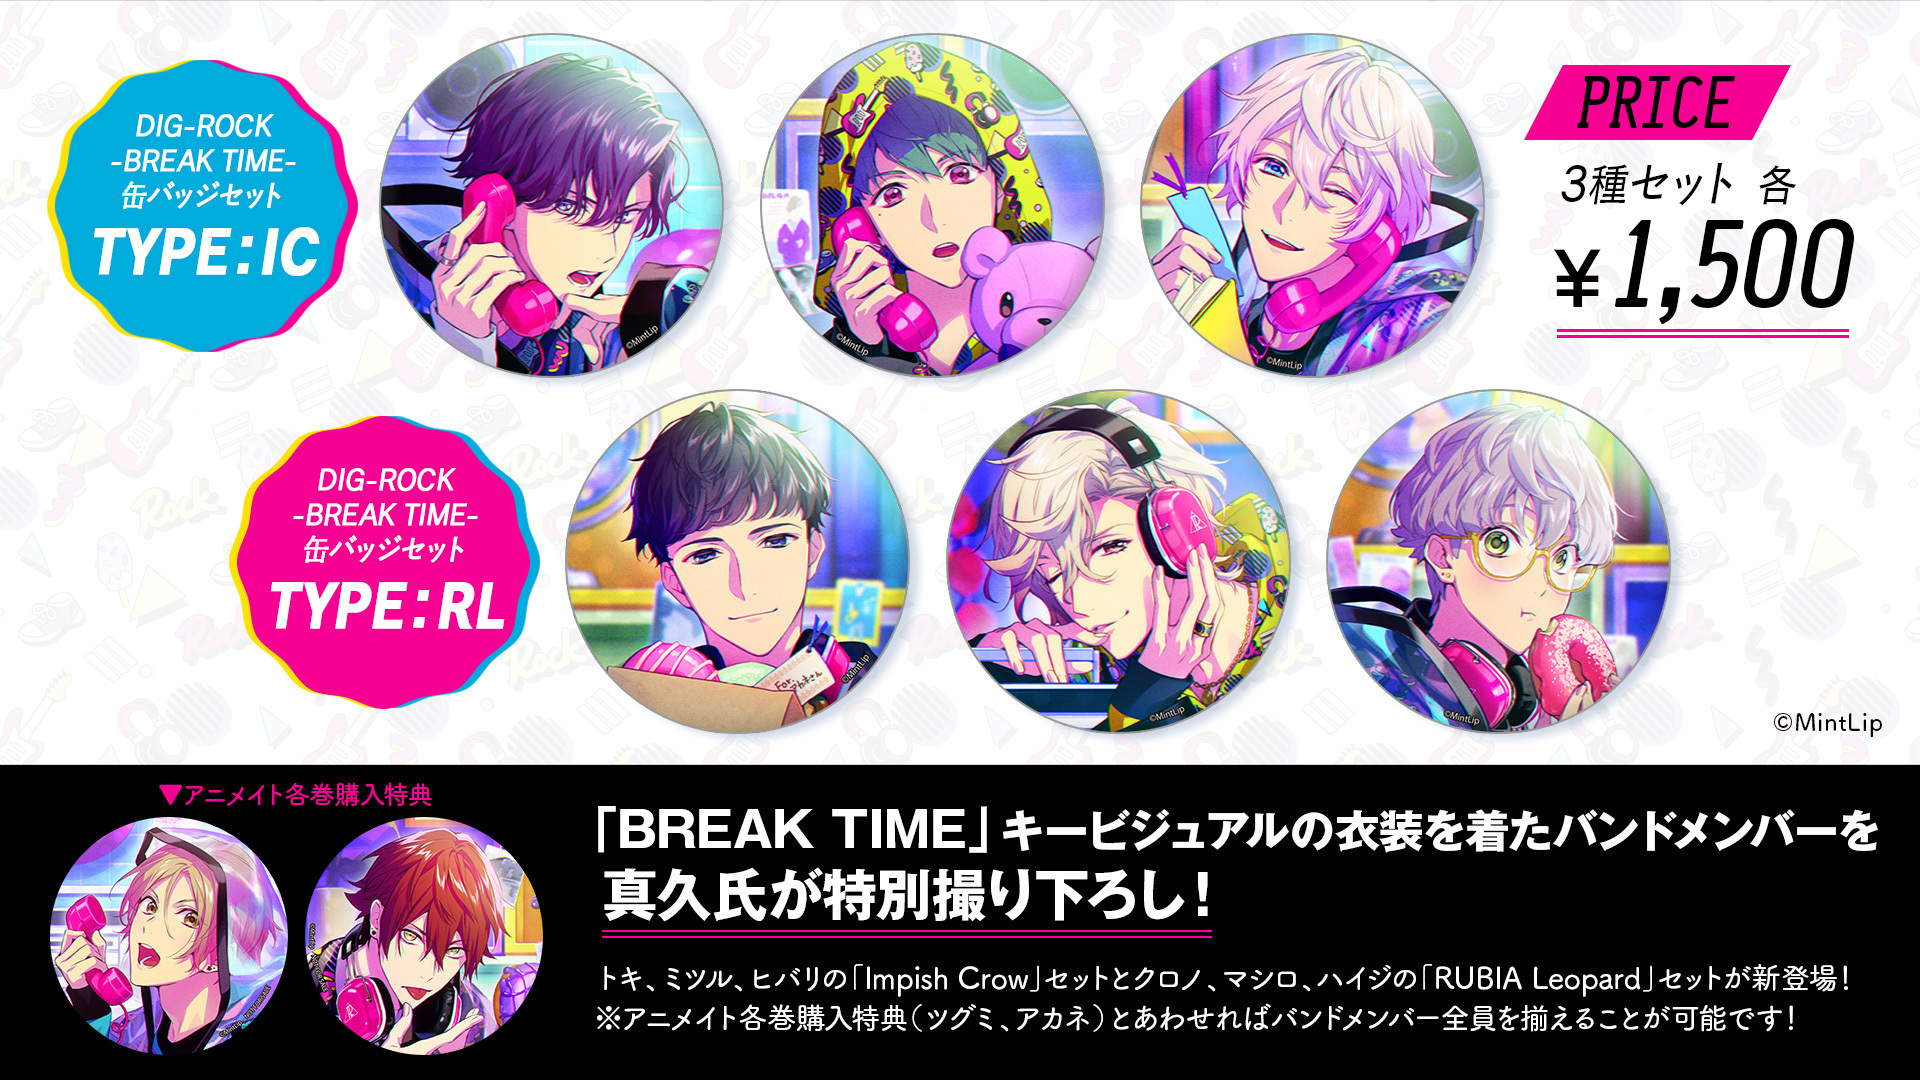 DIG-ROCK BREAK TIME 缶バッジセット Type：IC | DIG-ROCK | ティーム 